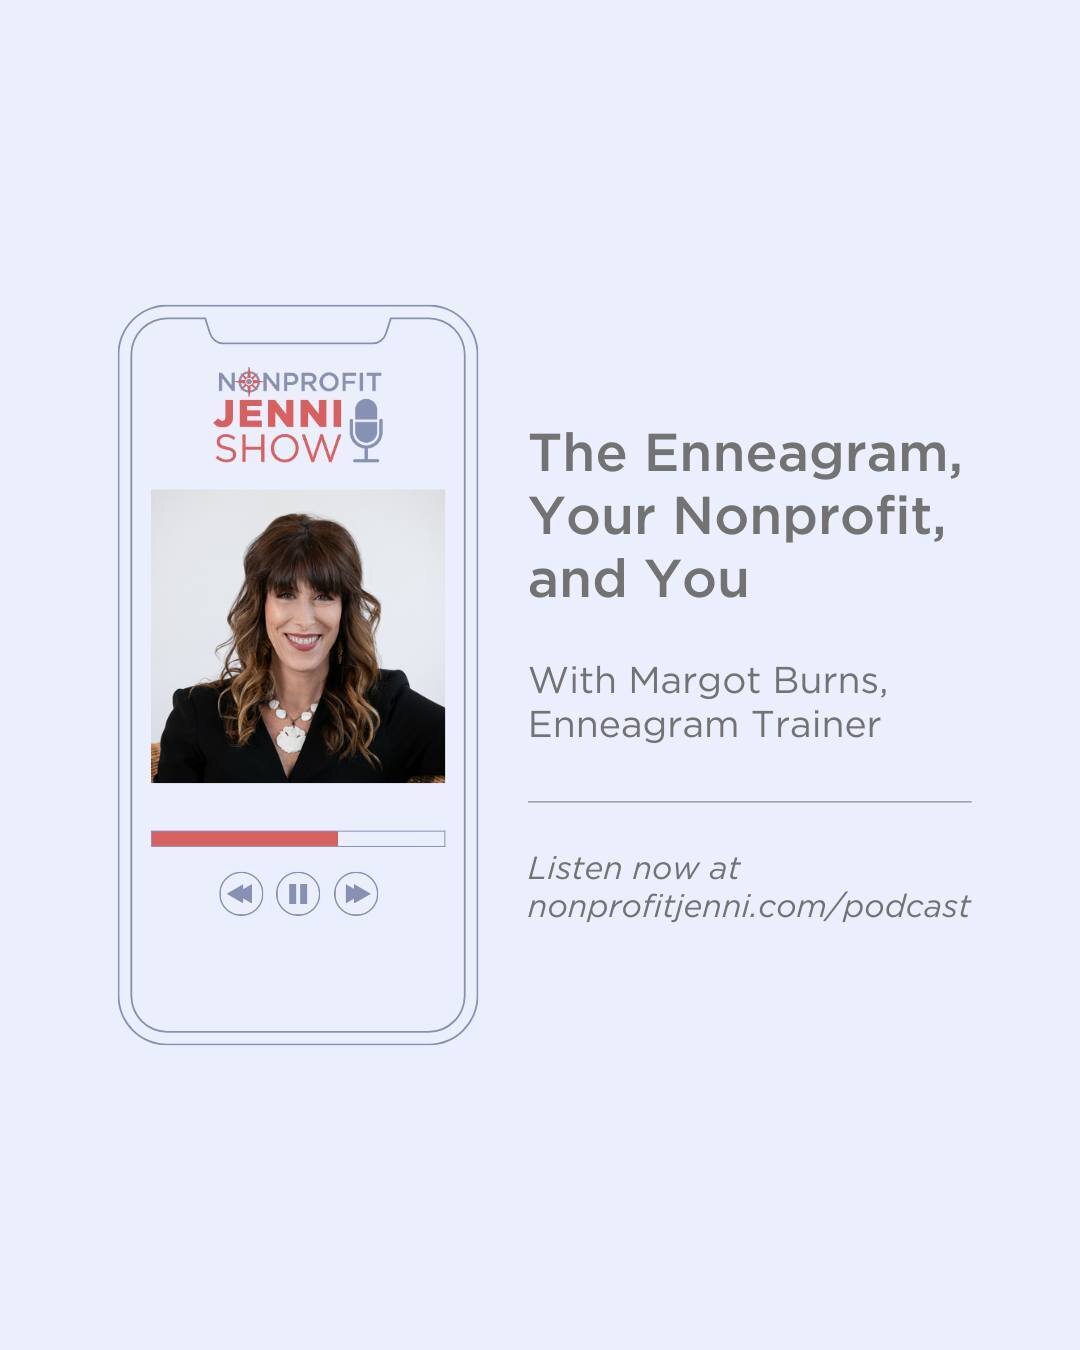 How does your personality type impact your nonprofit work? What about your team?

This week on the Nonprofit Jenni Show, I'm chatting with Margot Burns about what the Enneagram tells you about your work! Listen now at nonprofitjenni.com/podcast or wi